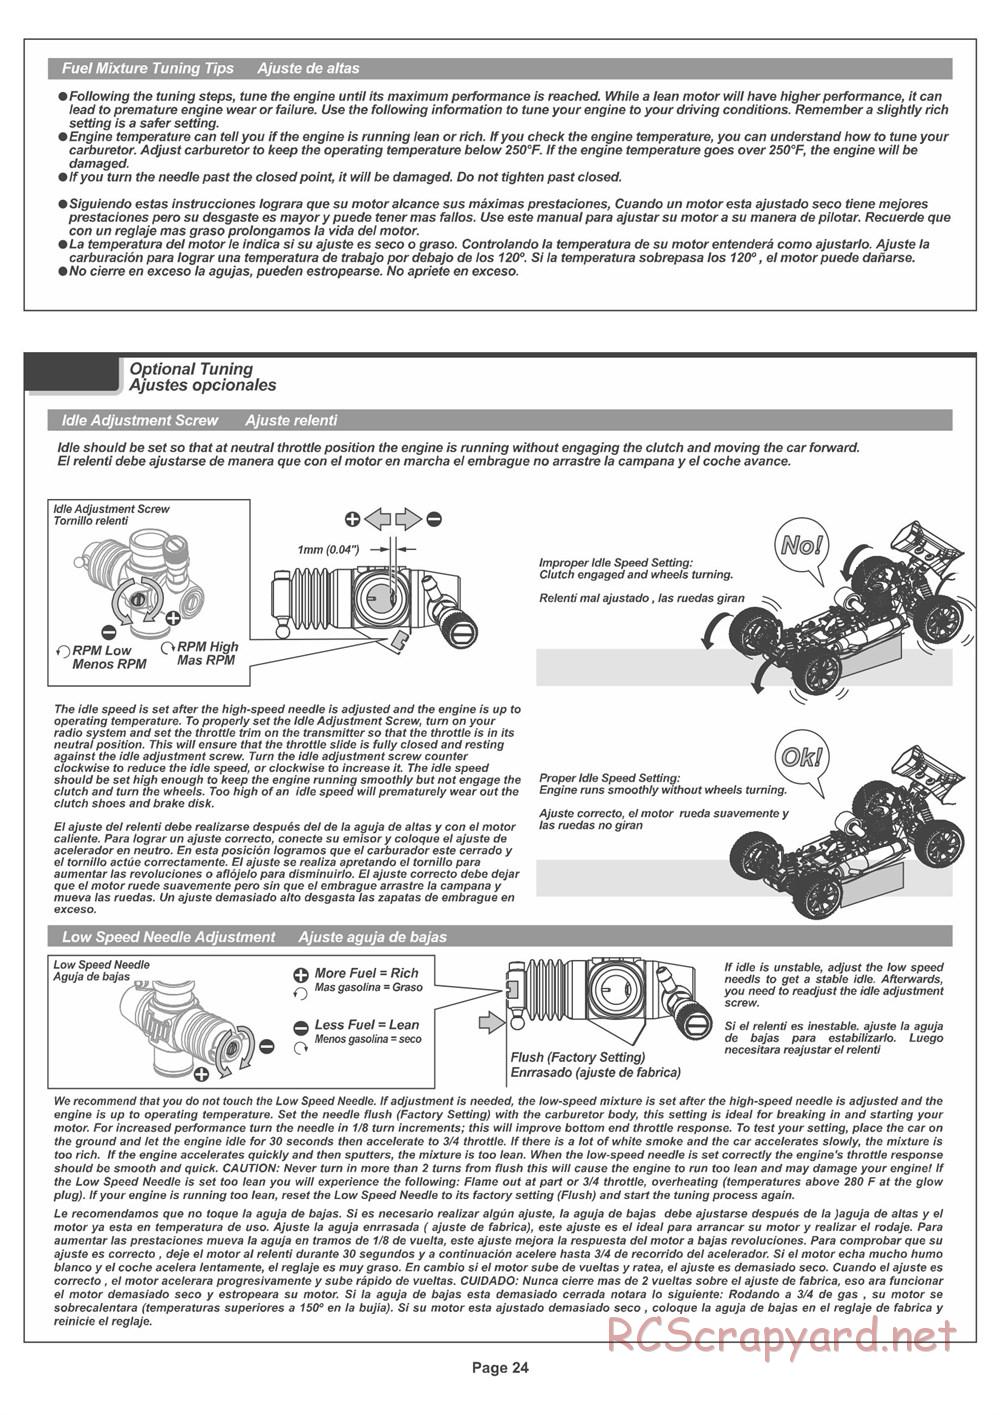 HPI - Pulse 4.6 Buggy - Manual - Page 24